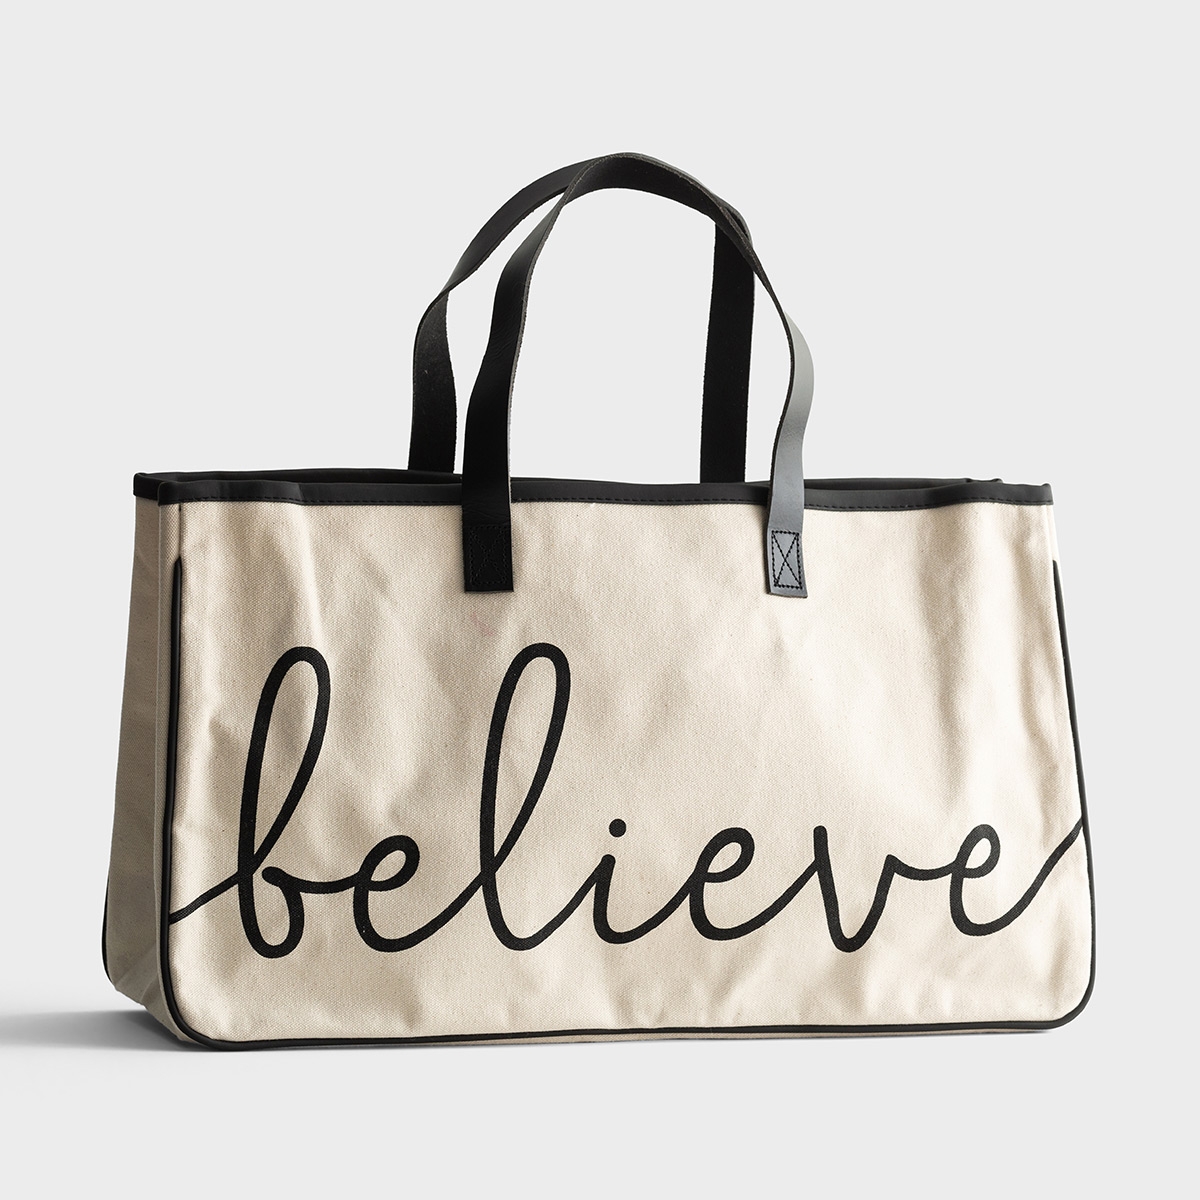 Believe - Canvas Tote Bag